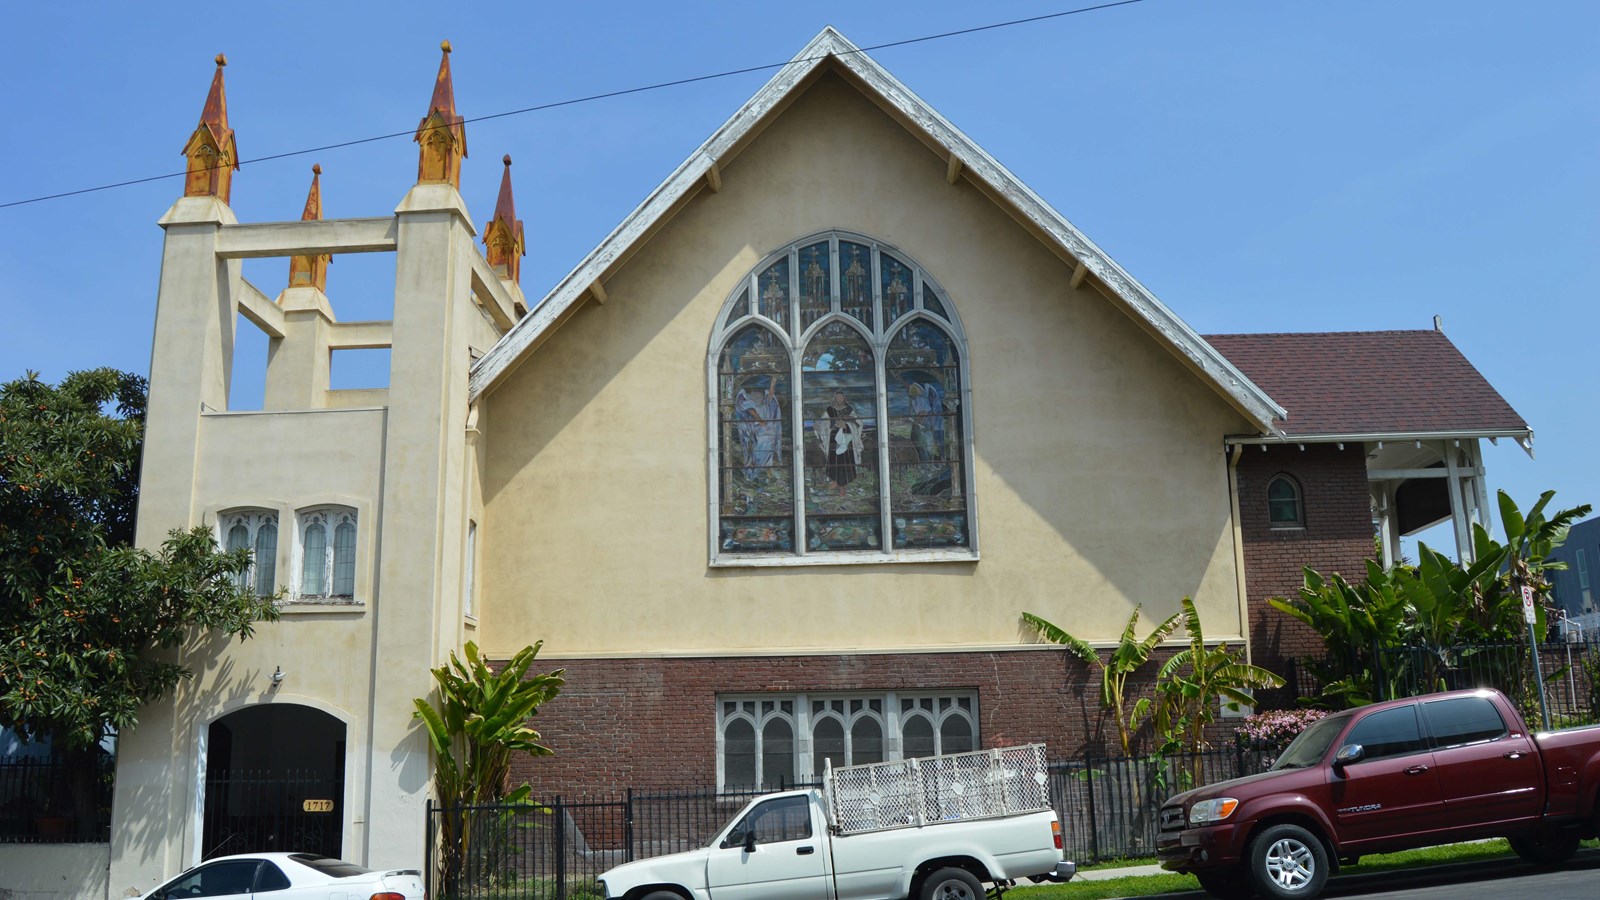 Exterior wall of church with a centered large stained glass window and a square bell tower